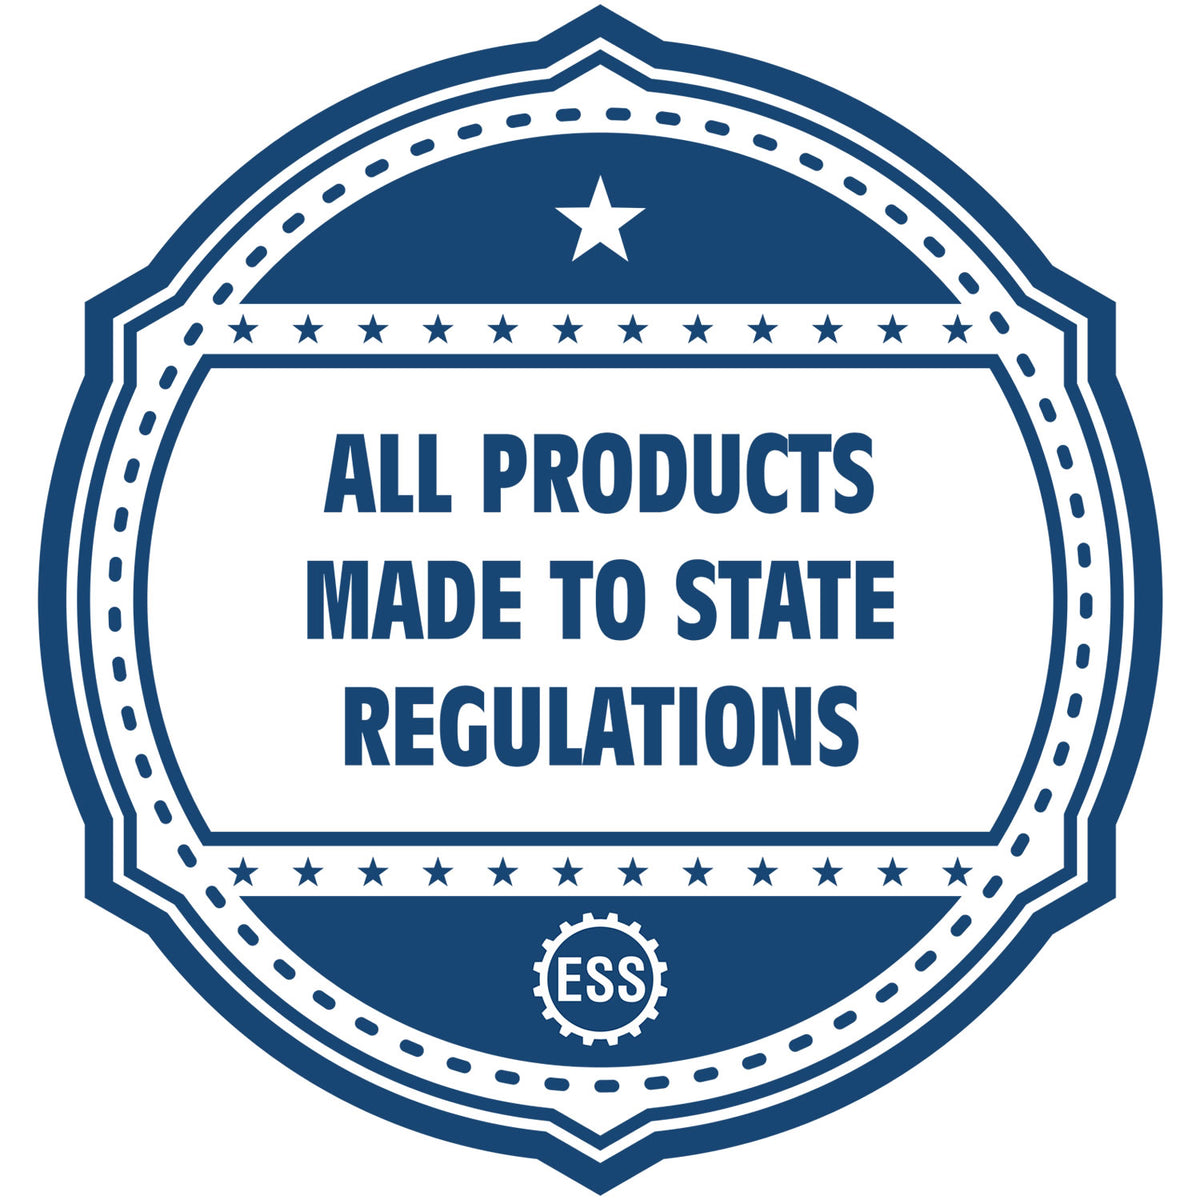 An icon or badge element for the Premium MaxLight Pre-Inked Georgia Engineering Stamp showing that this product is made in compliance with state regulations.